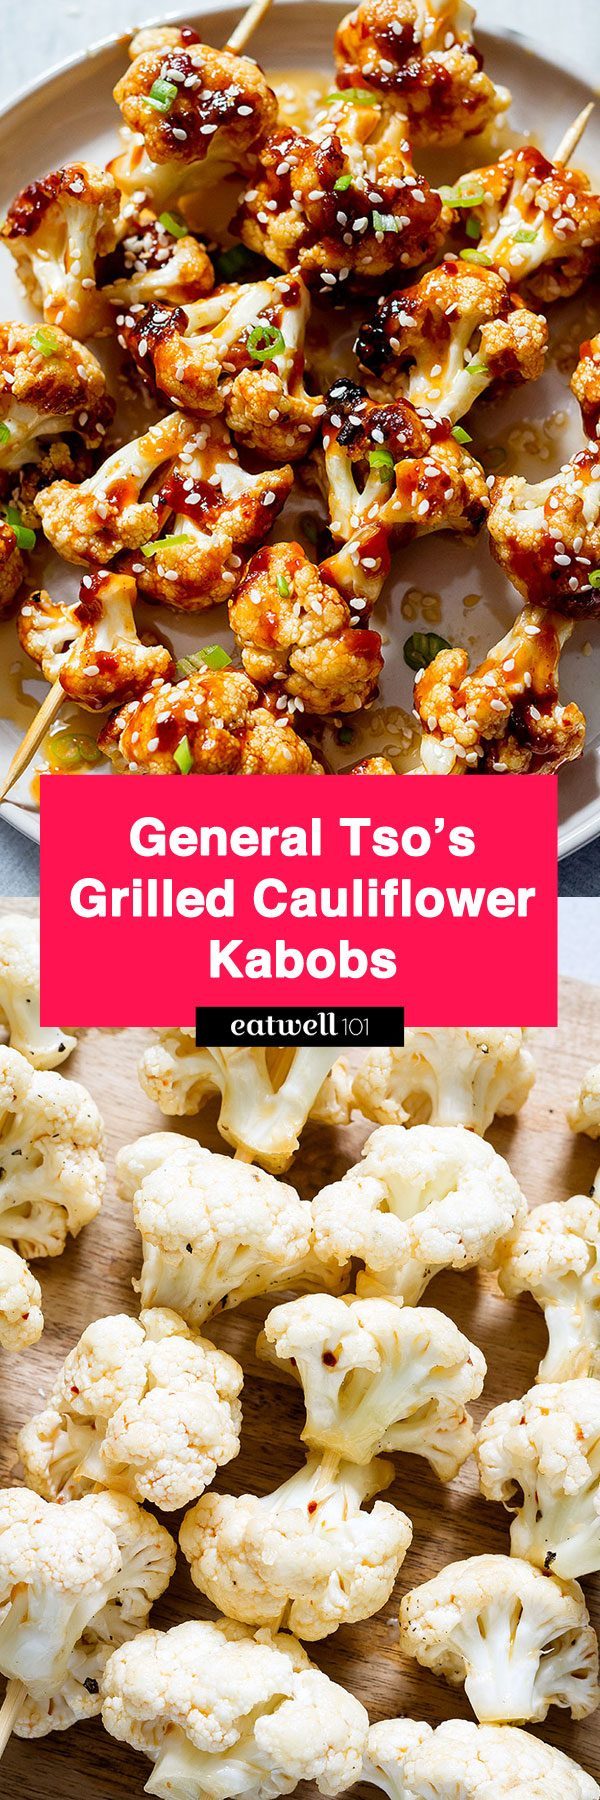 Grilled General Tso's Cauliflower Kabobs - #lowcarb #glutenfree #eatwell101 #recipe - A crunchy-sweet twist on a take-out favorite. 